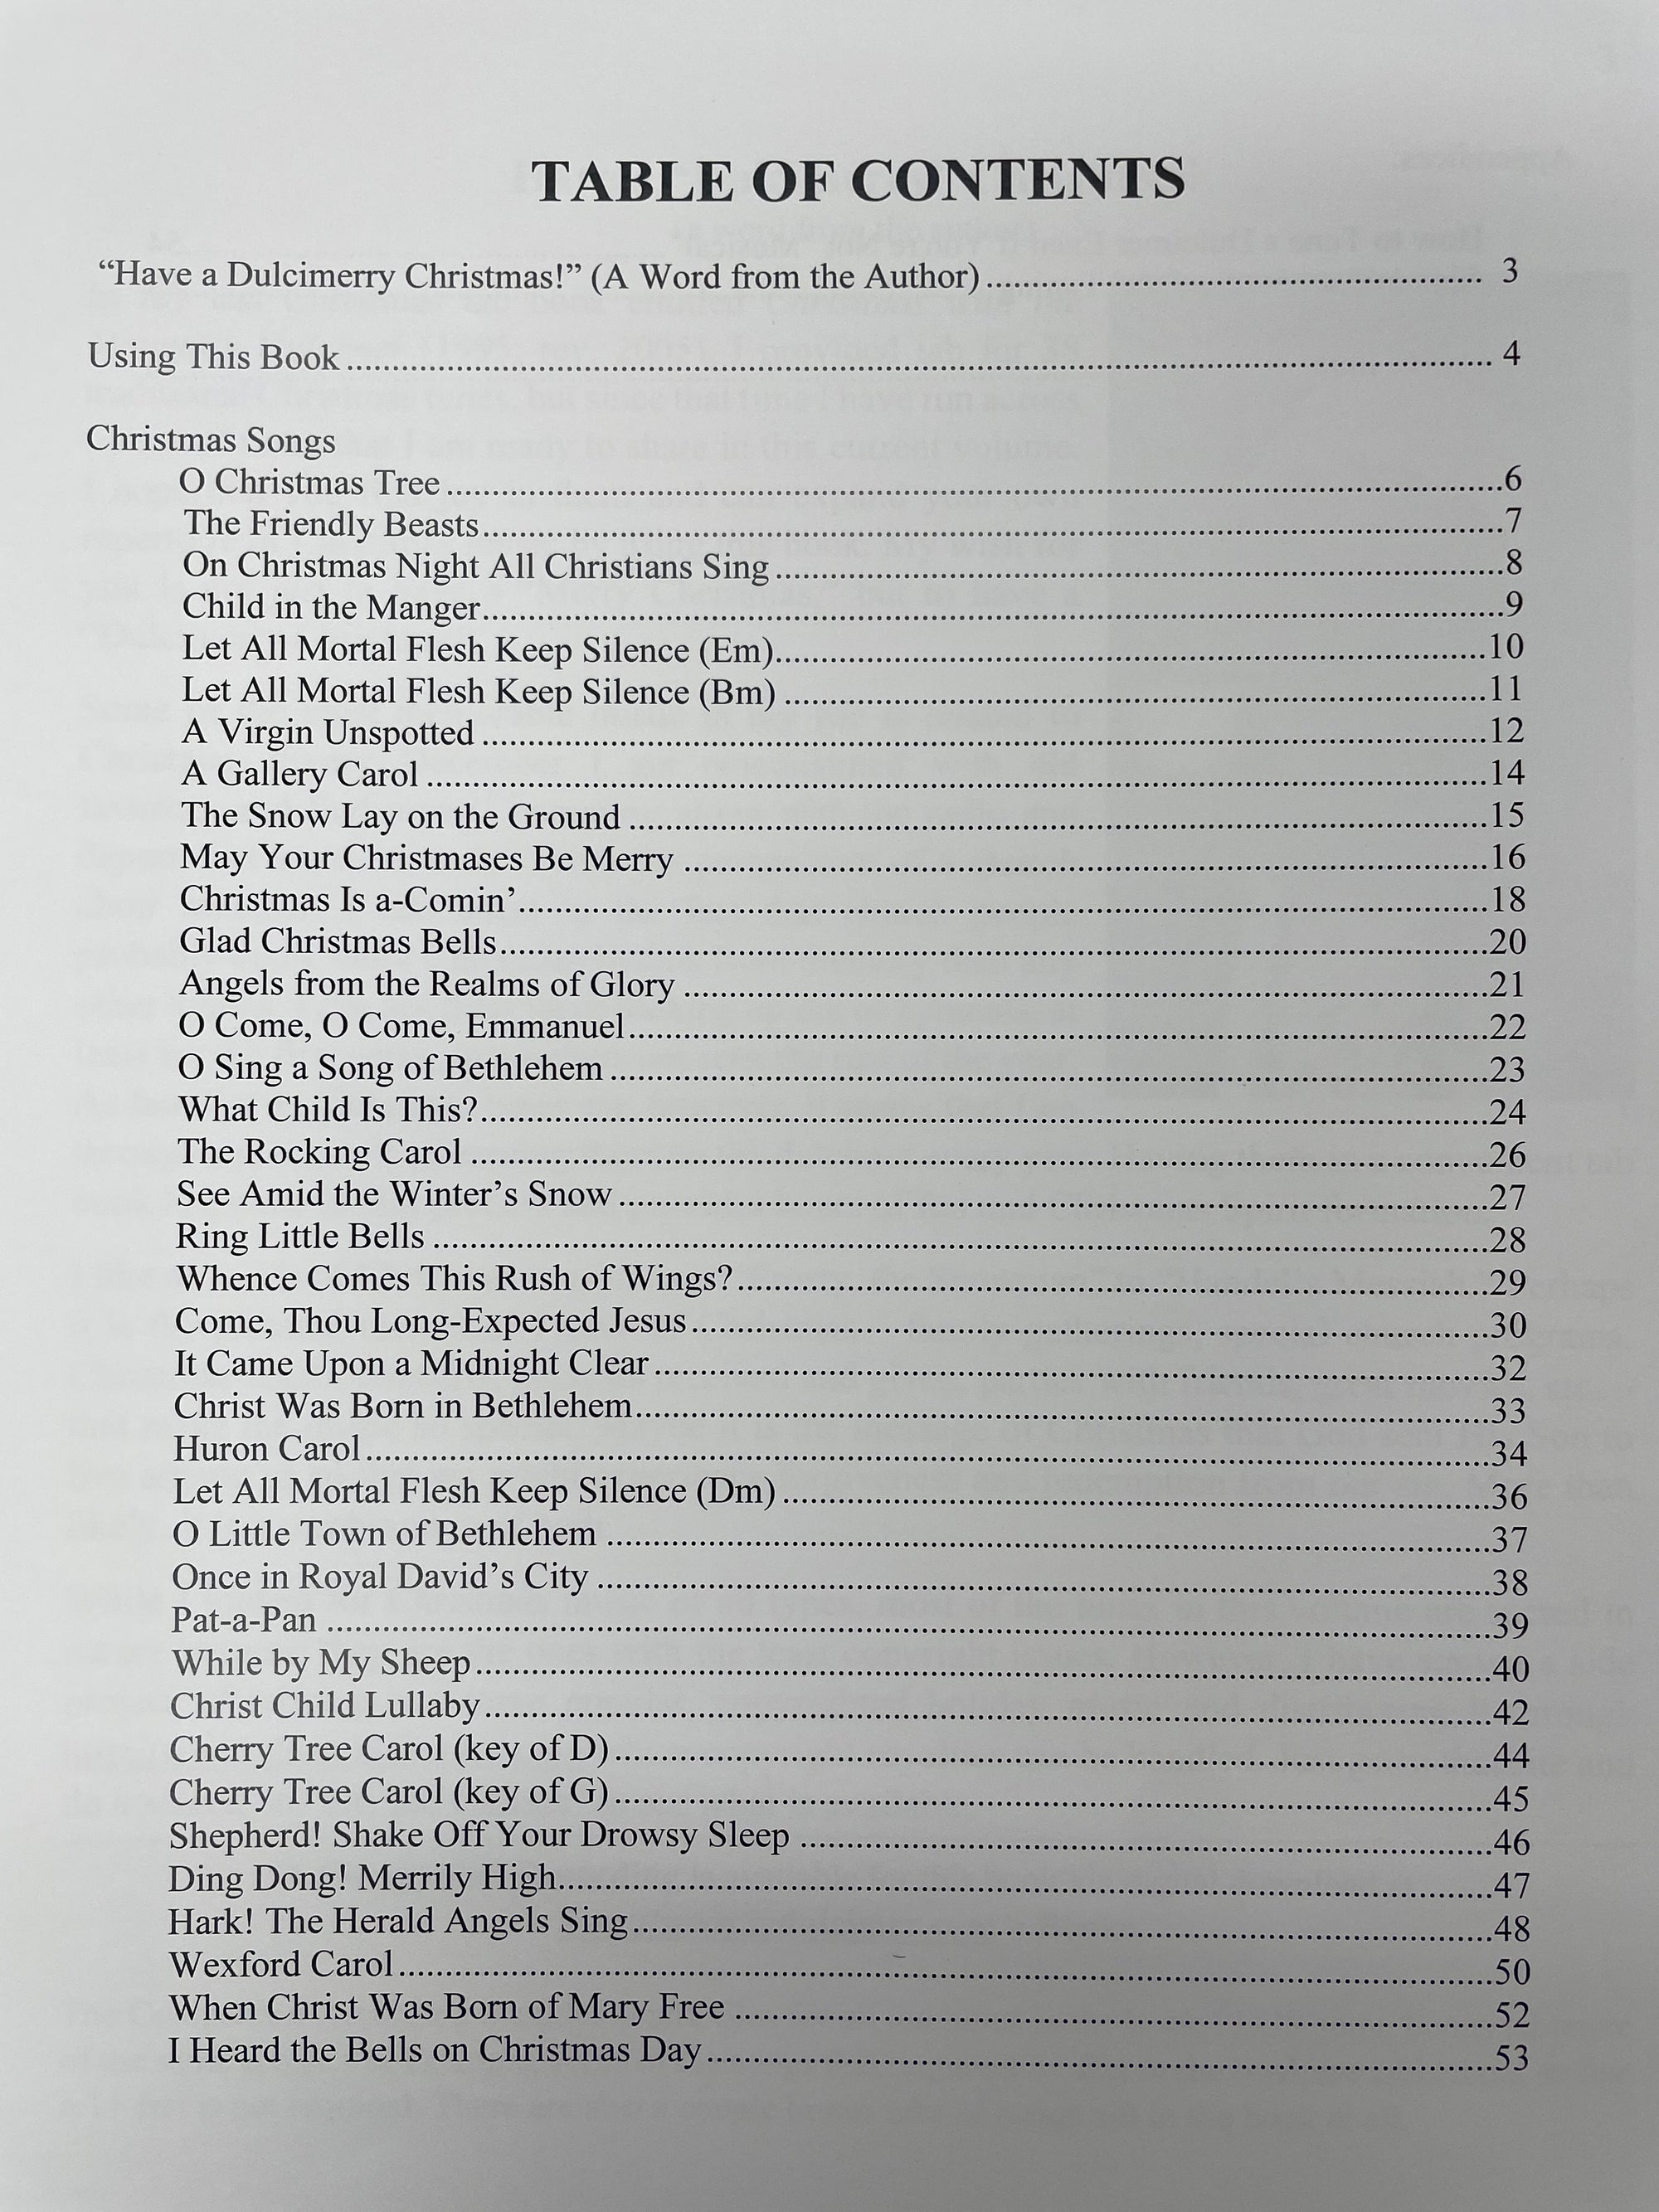 The table of contents of Christmas with the Mountain Dulcimer Vol 2 - by Joe Collins.